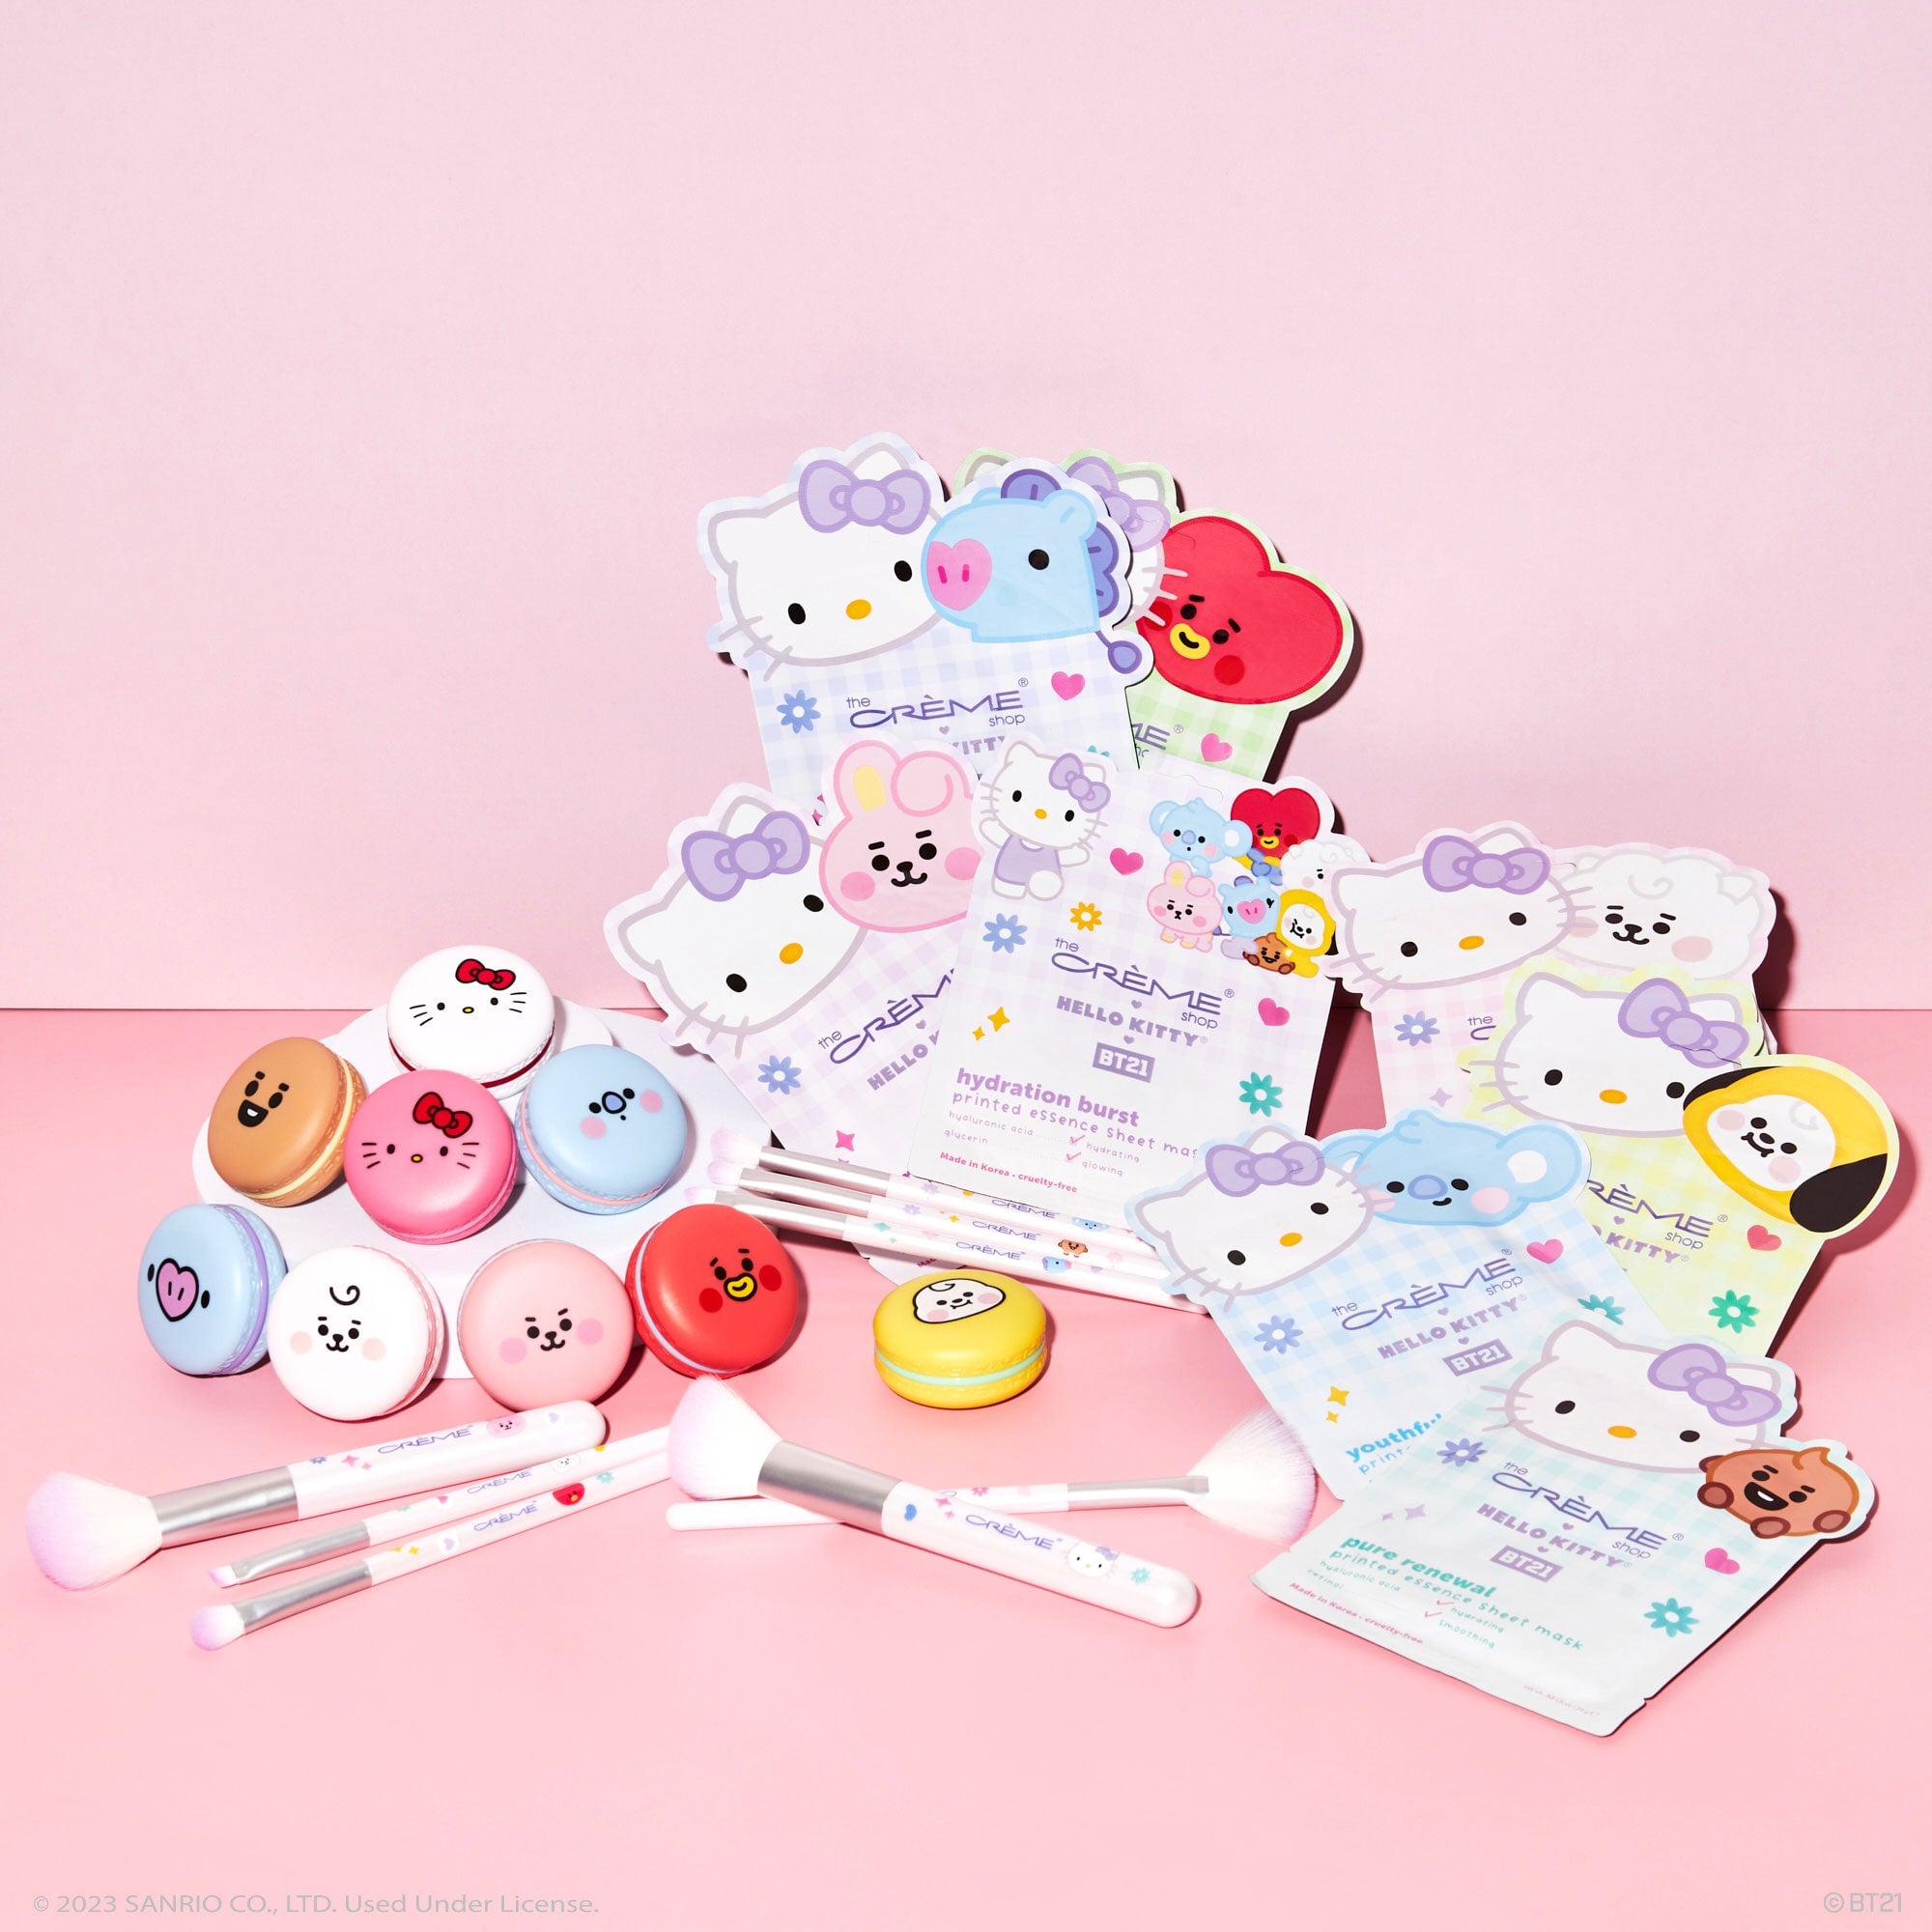 Hello Kitty Supercute Skin! Over-Makeup Blemish Patches